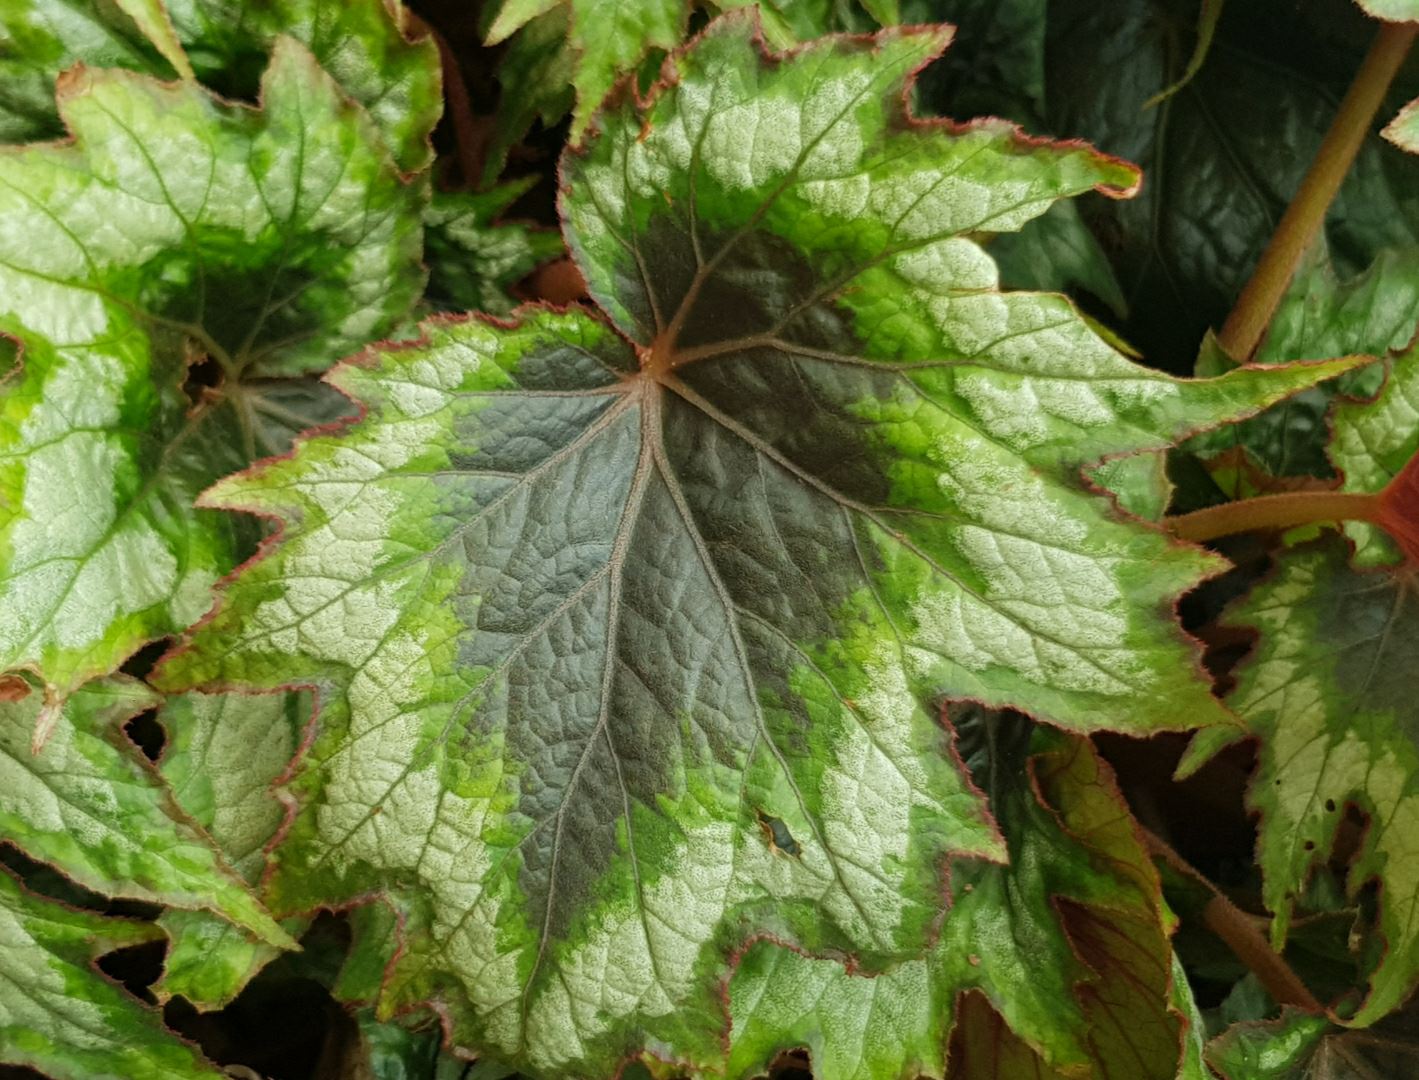 Begonia sp. Unknown cultivar - similar to Iron Cross